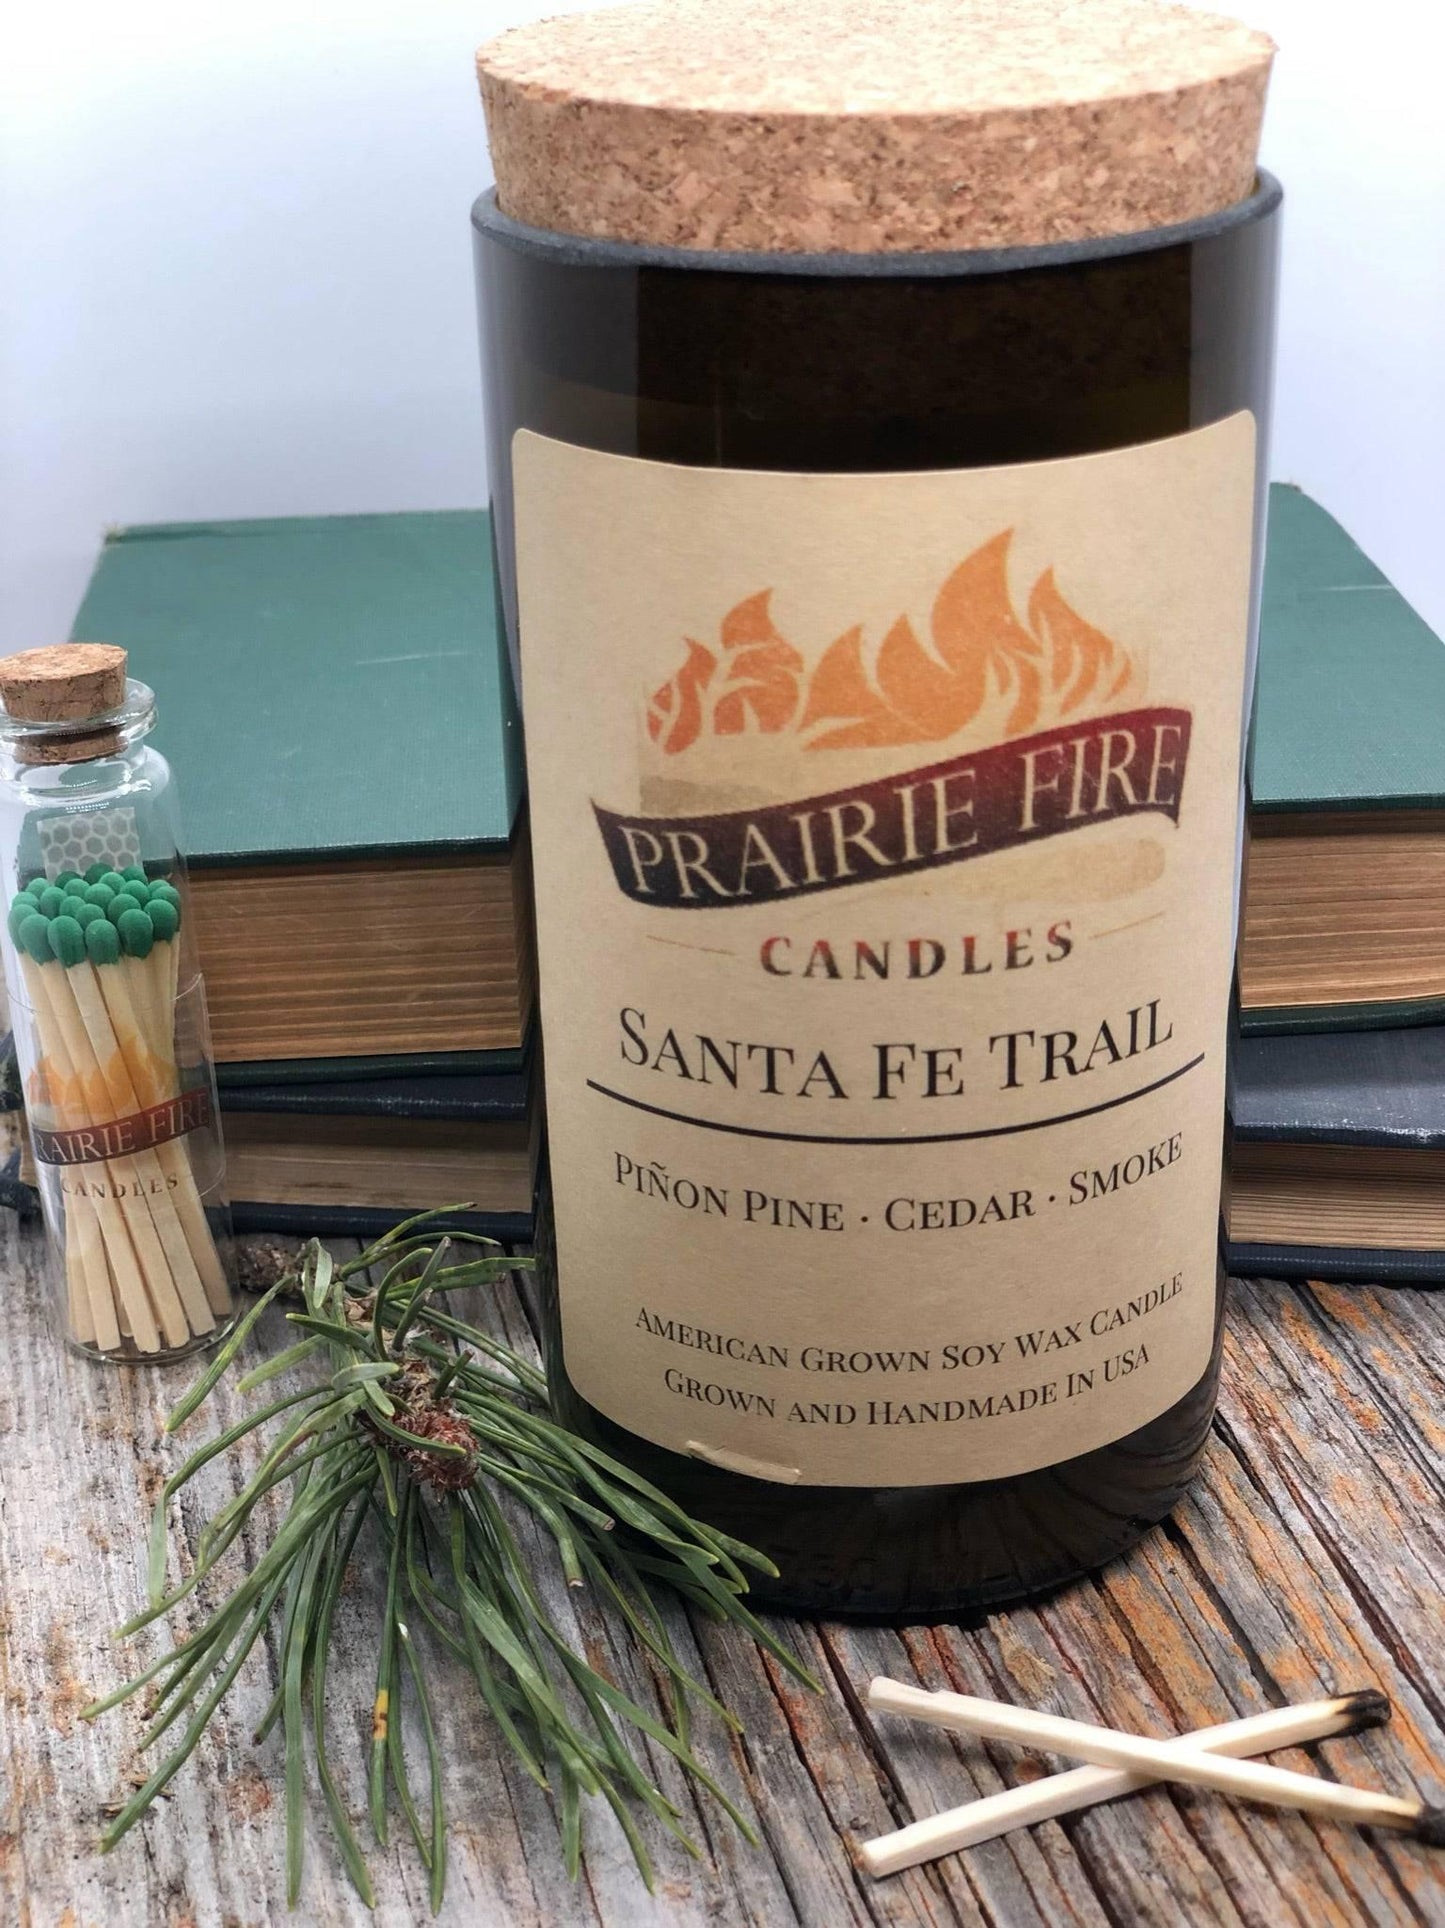 Santa Fe Trail Soy Wax Candle | Repurposed Wine Bottle Candle Natural Cork | Handmade in USA Candle | Eco-Friendly Candle | Non-Toxic Soy Candle - Prairie Fire Candles